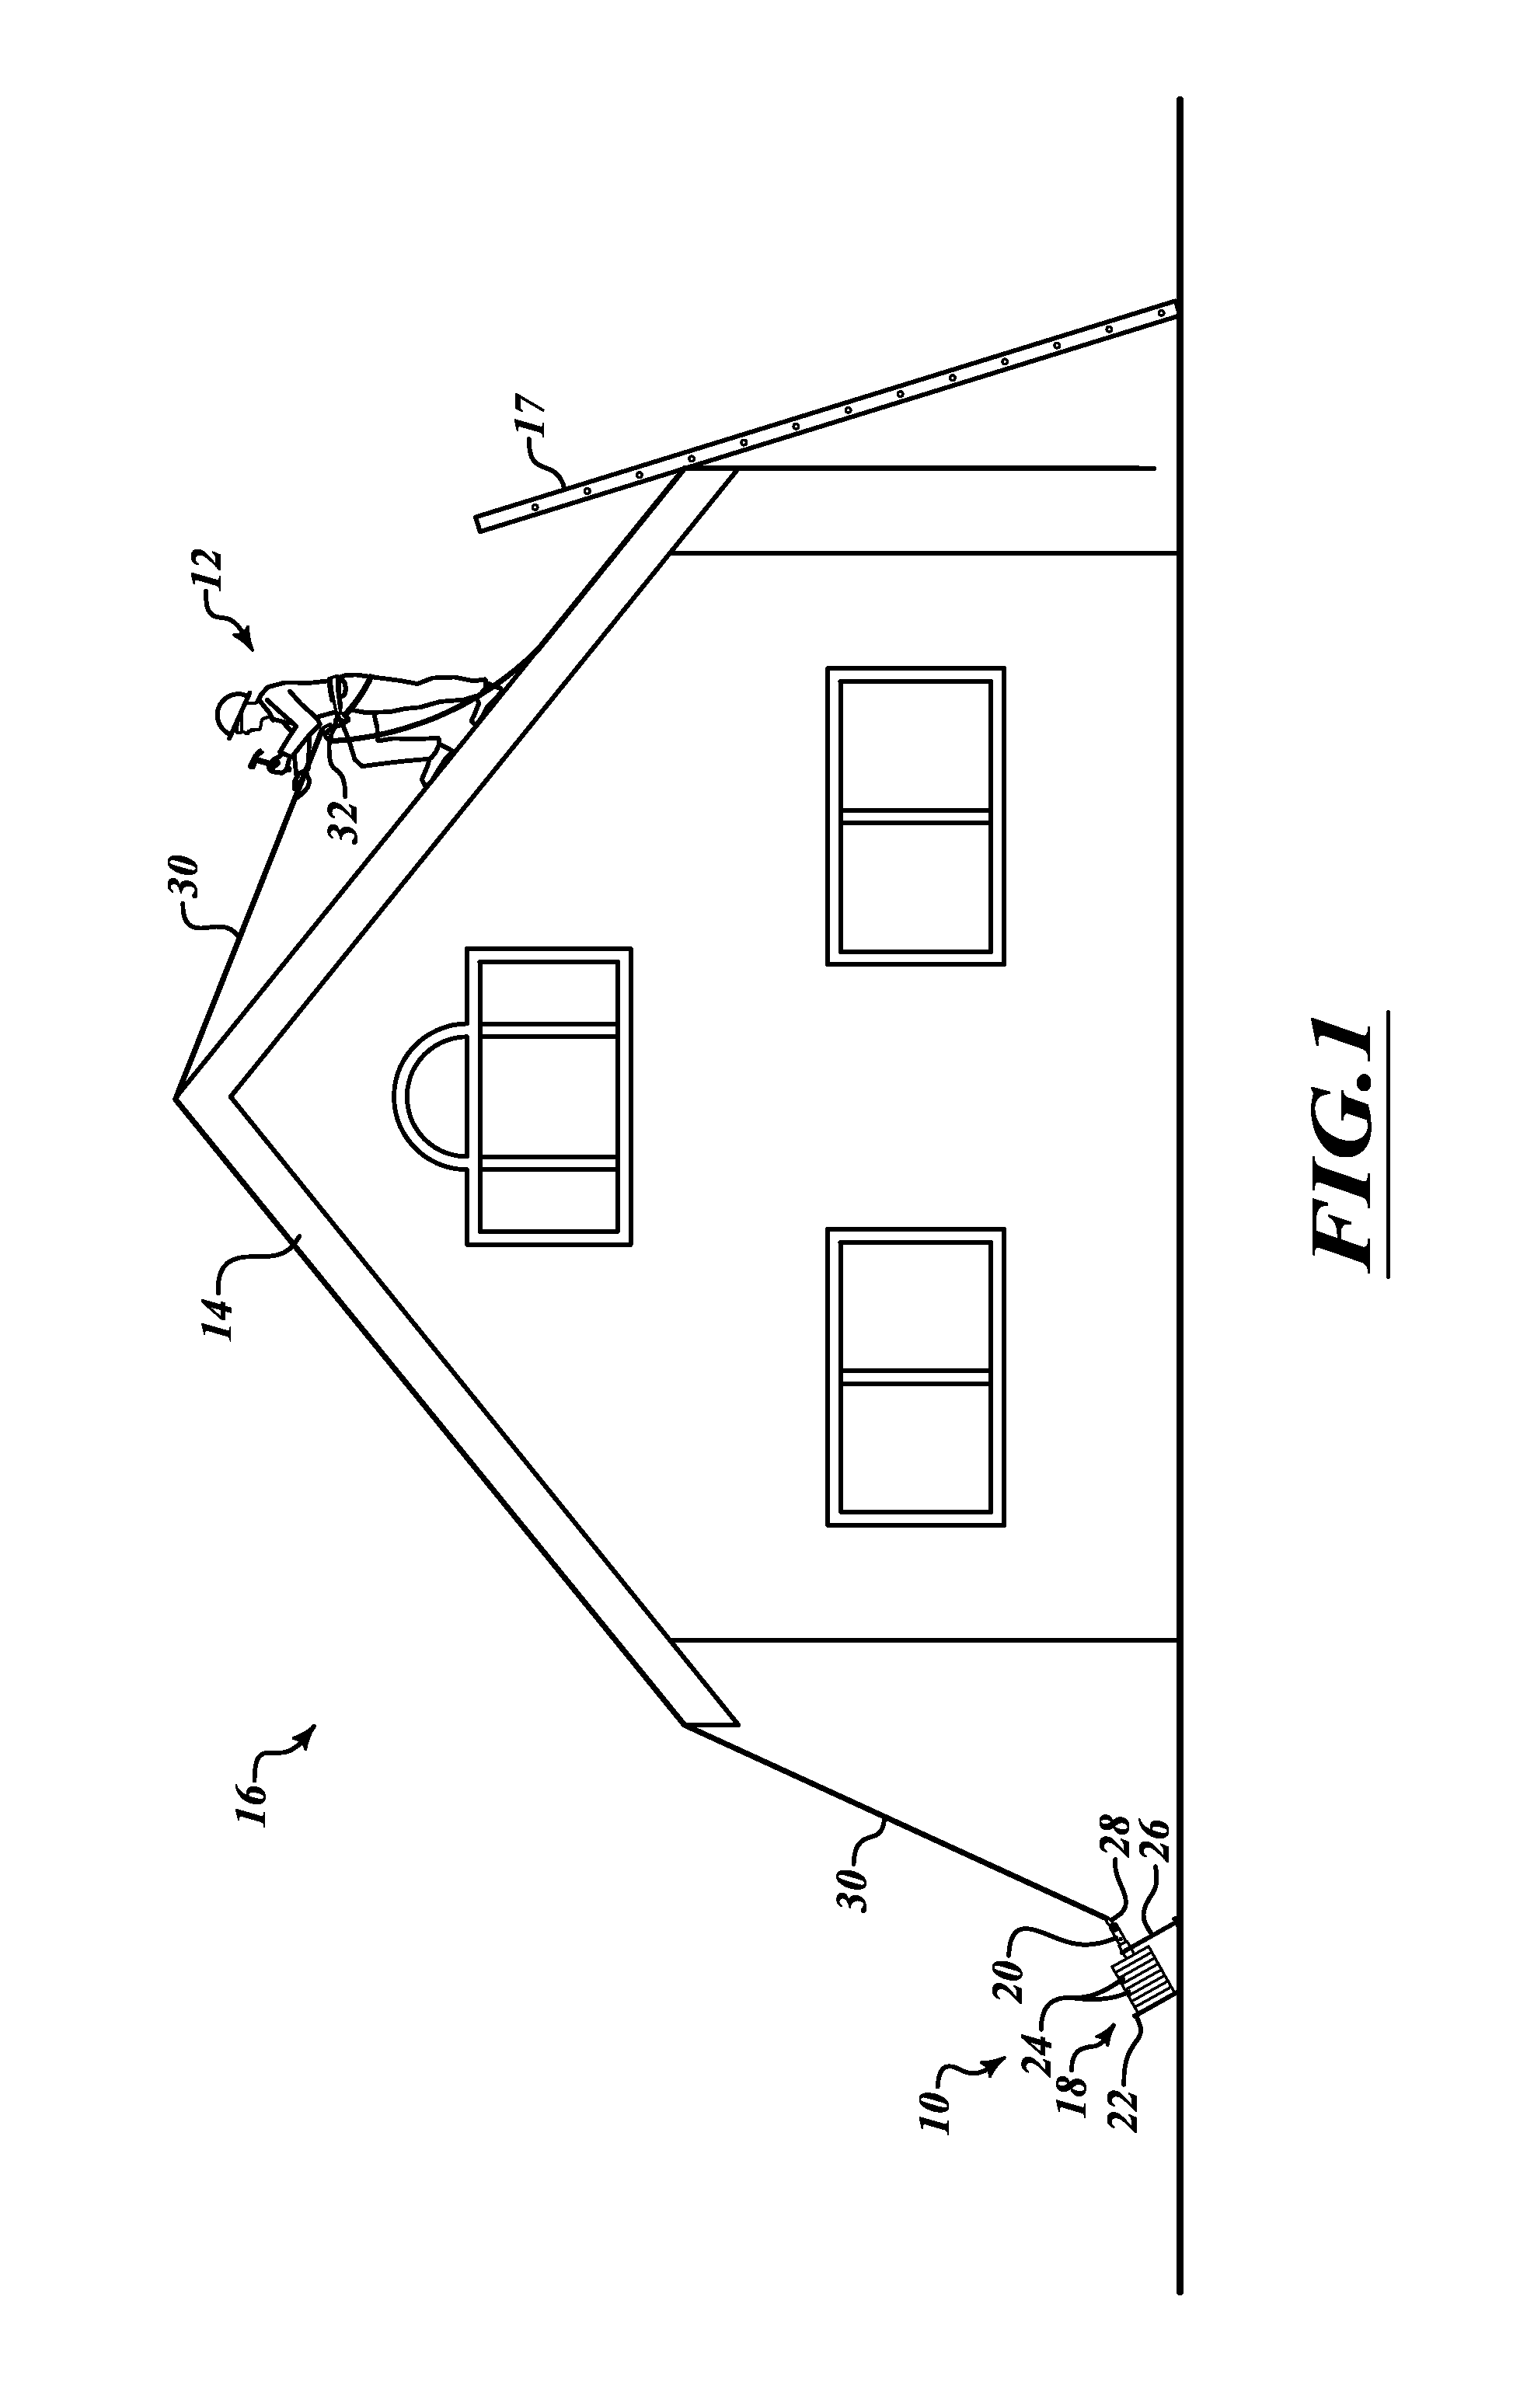 Single person portable belay anchor system and method